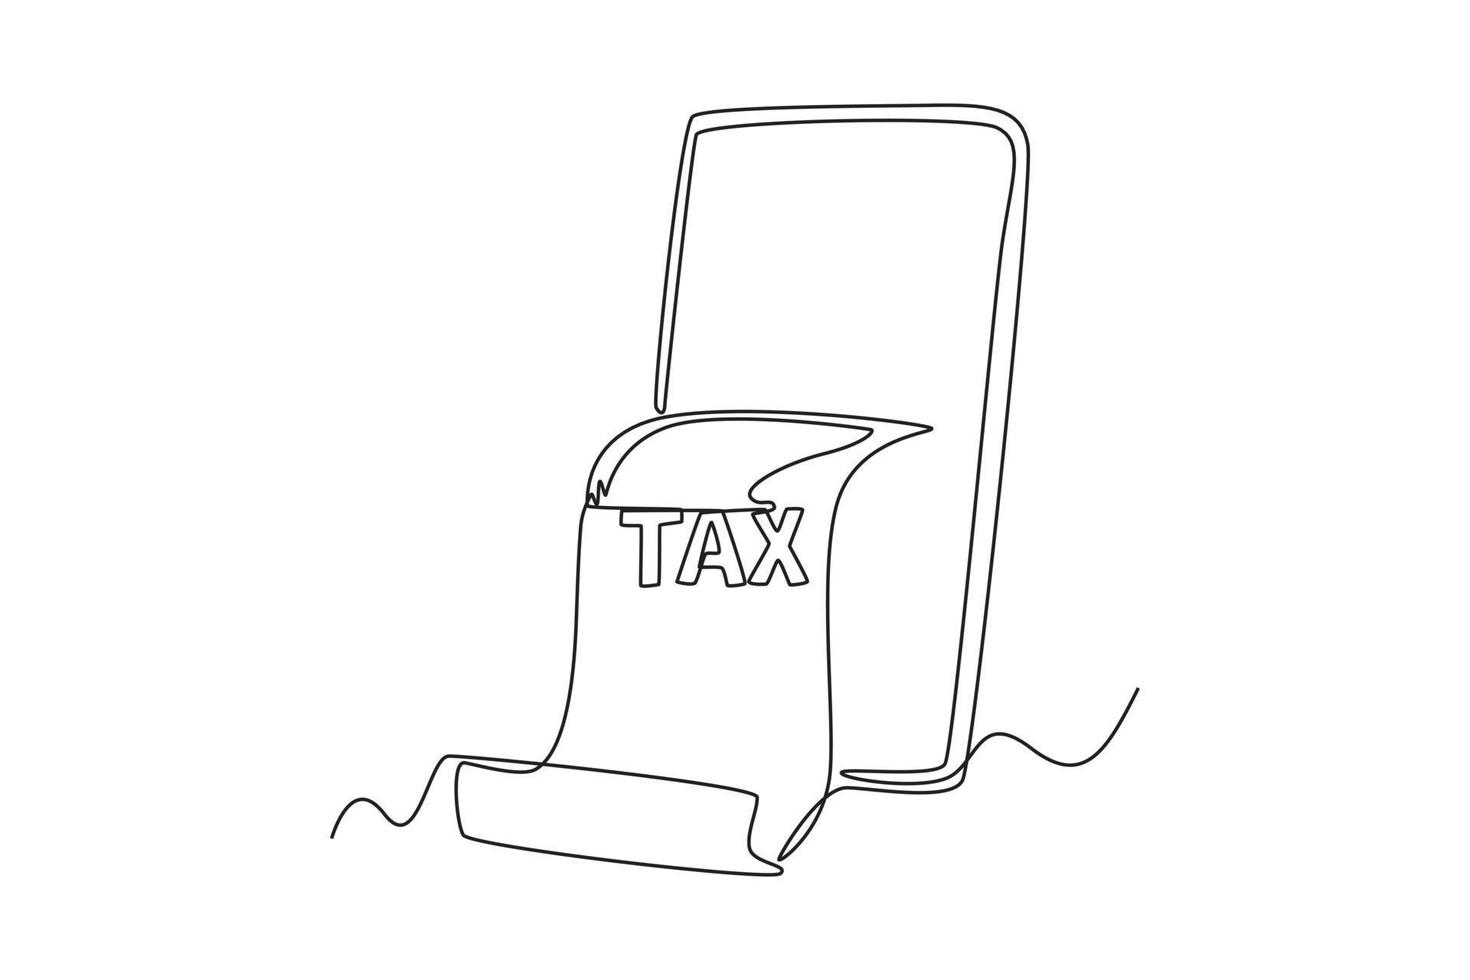 Single one line drawing tax bill on smartphone. Tax concept. Continuous line draw design graphic vector illustration.